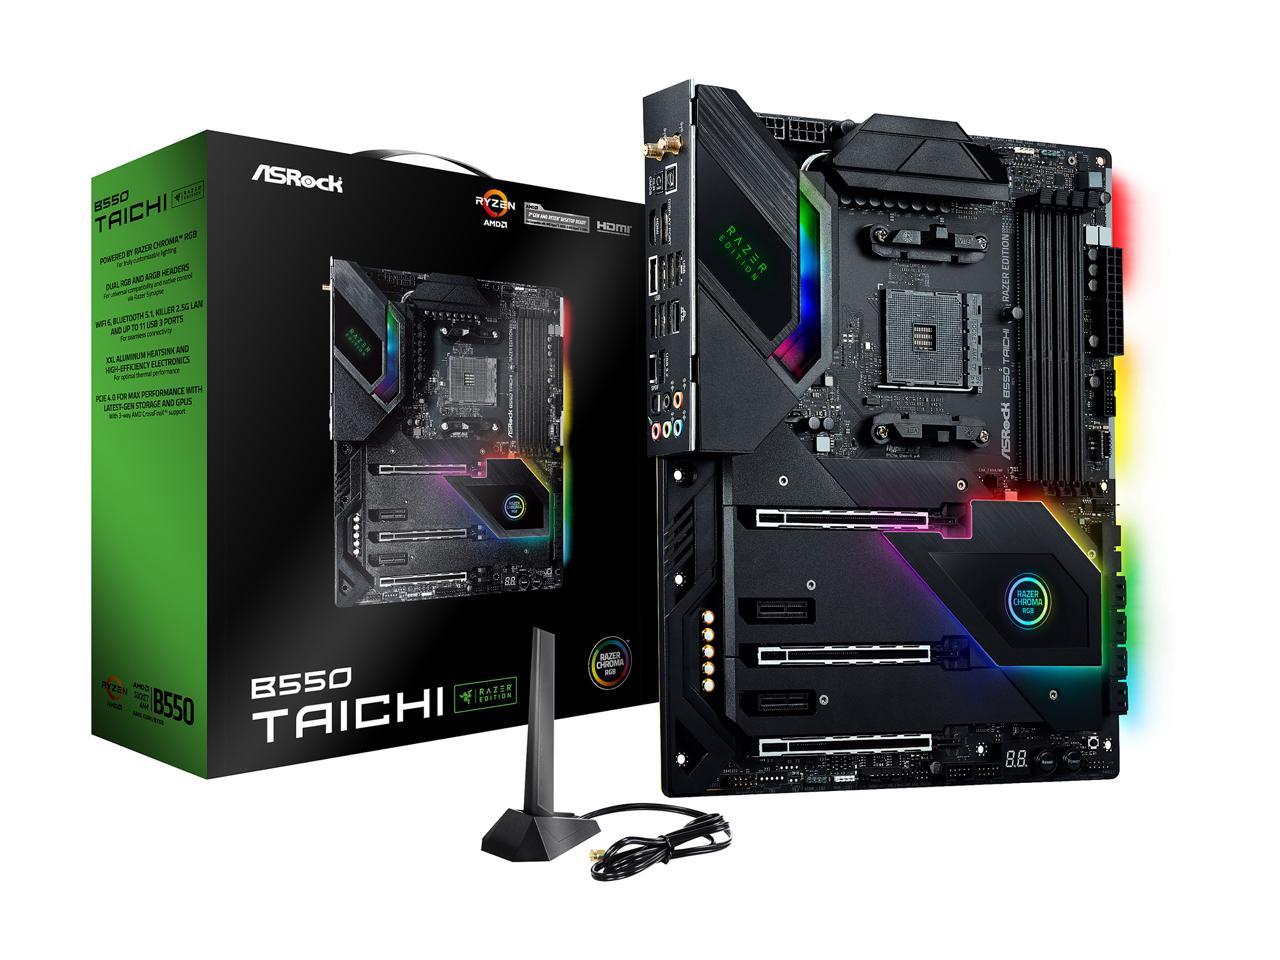 ASRock launches X570 and B550 Taichi Razer Edition motherboards